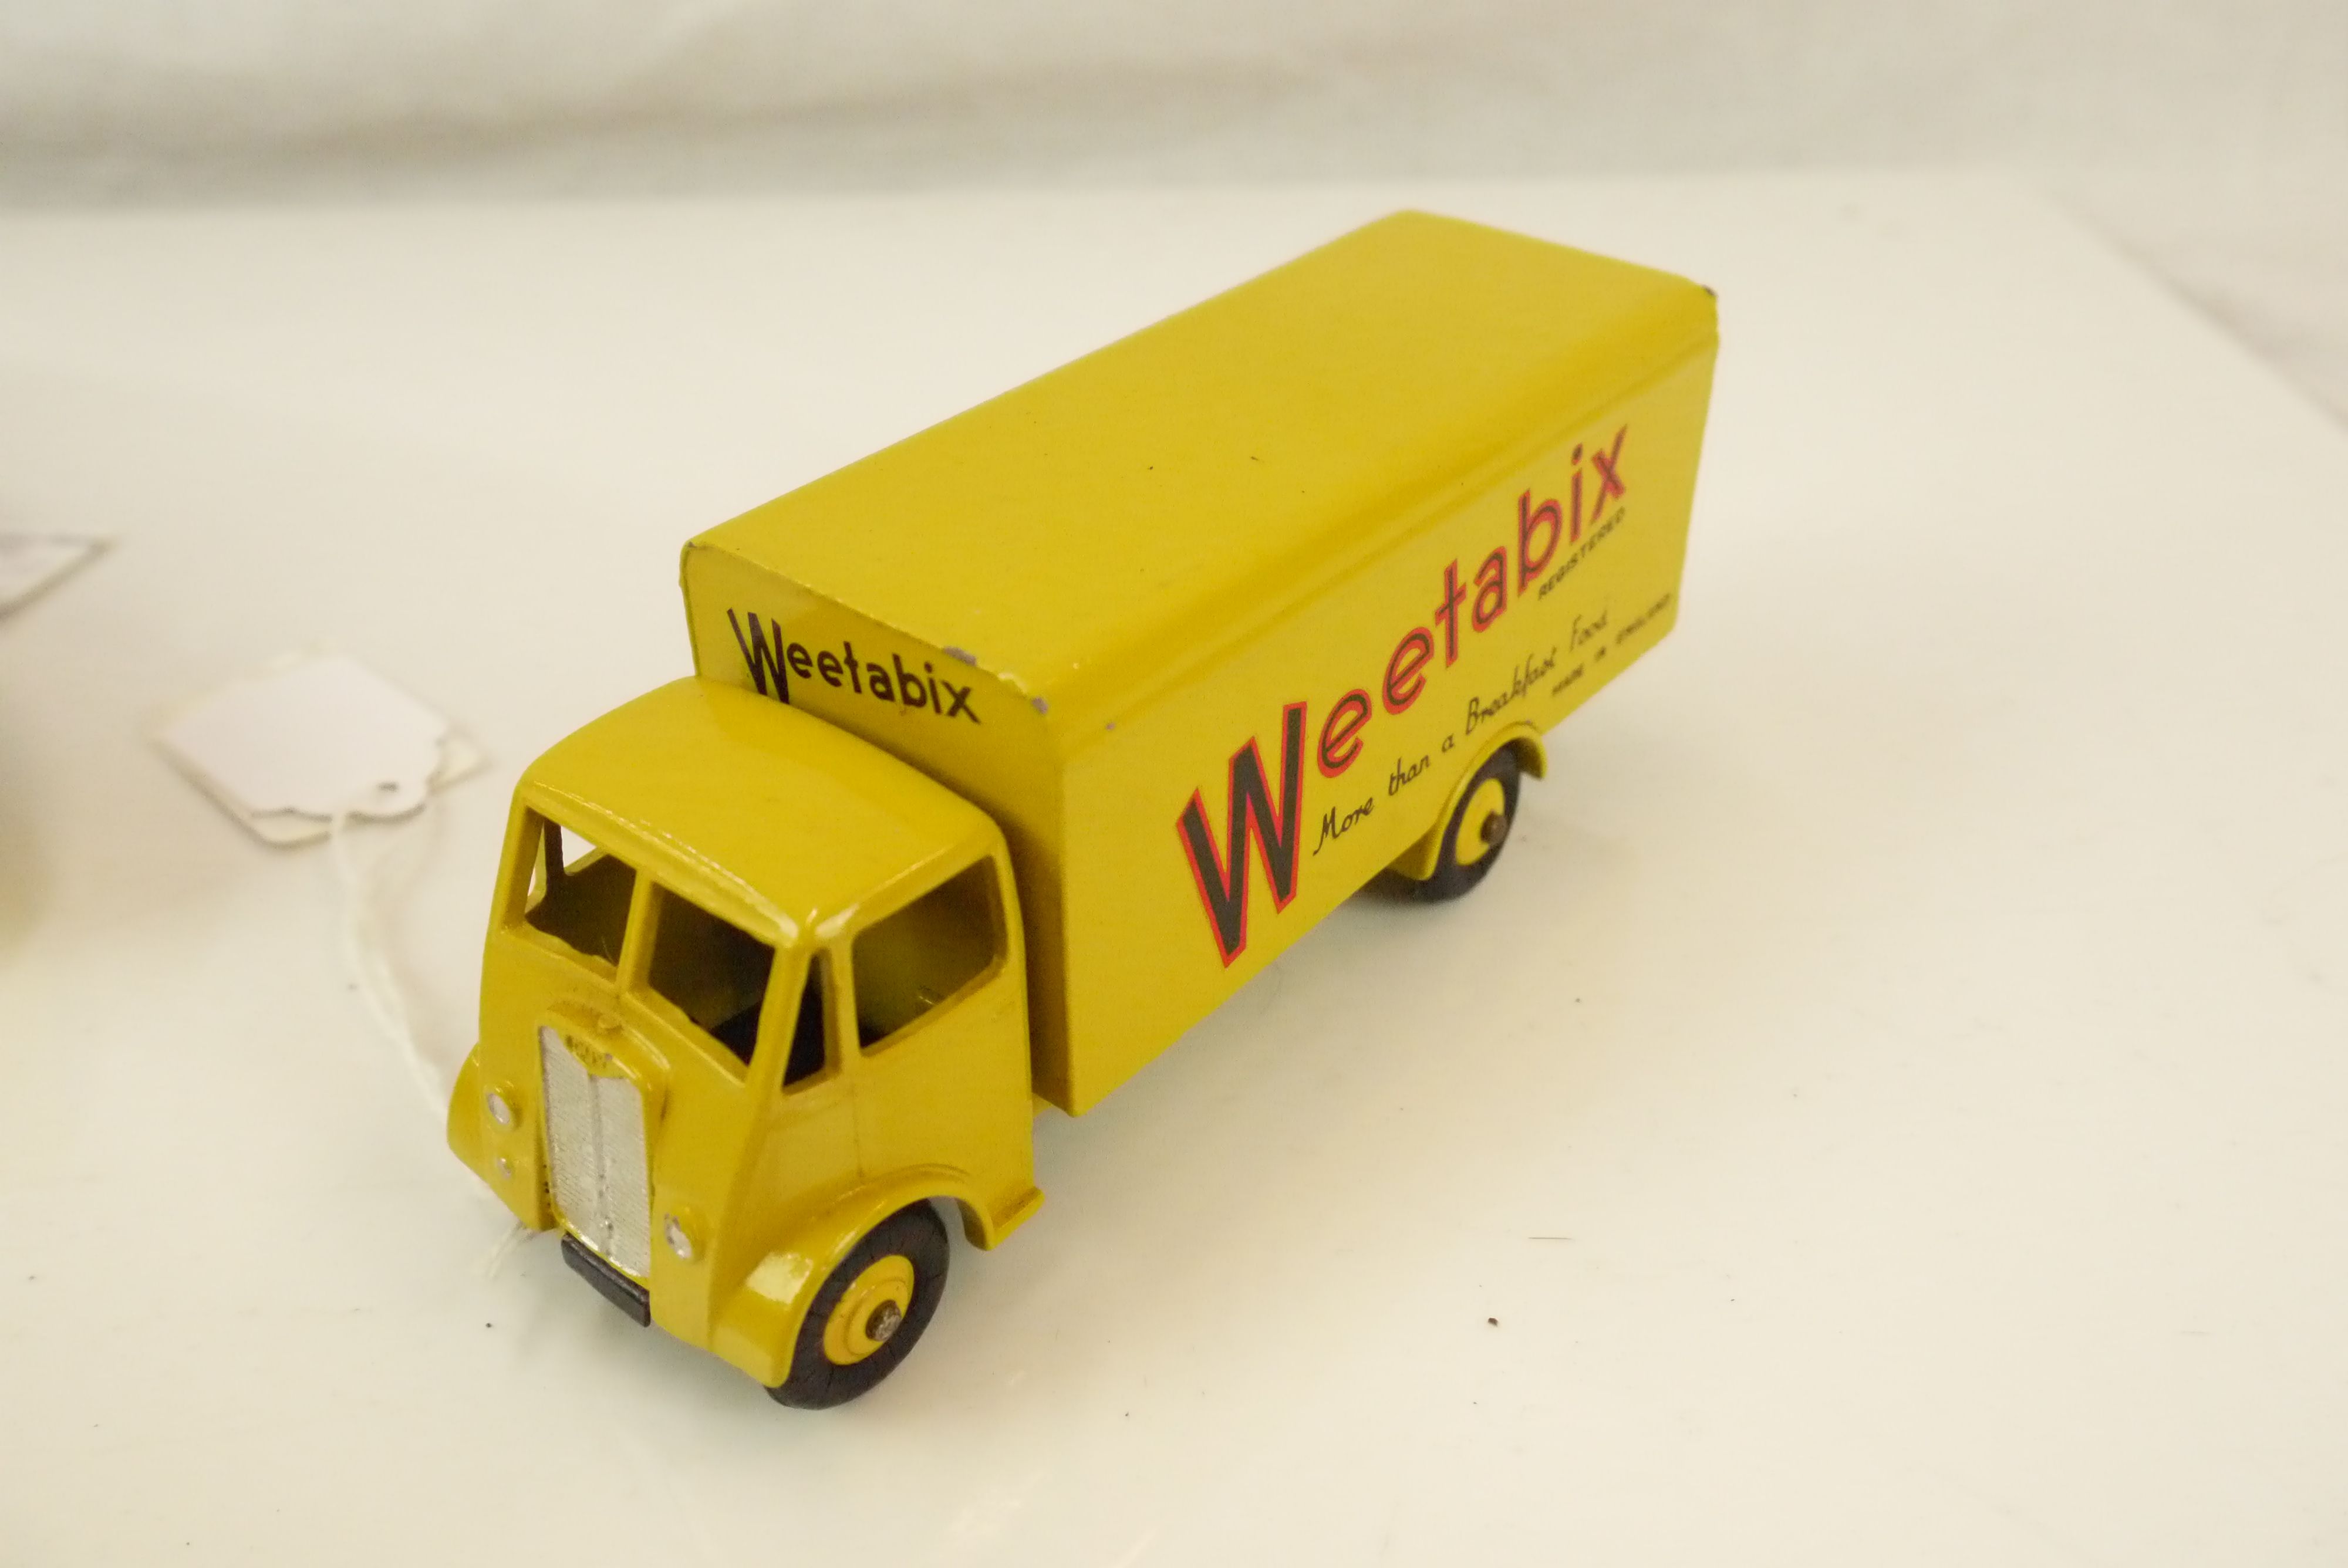 Playworn Corgi diecast Supertoys Guy with Weetabix decals (contempory), in VG condition plus - Image 4 of 6